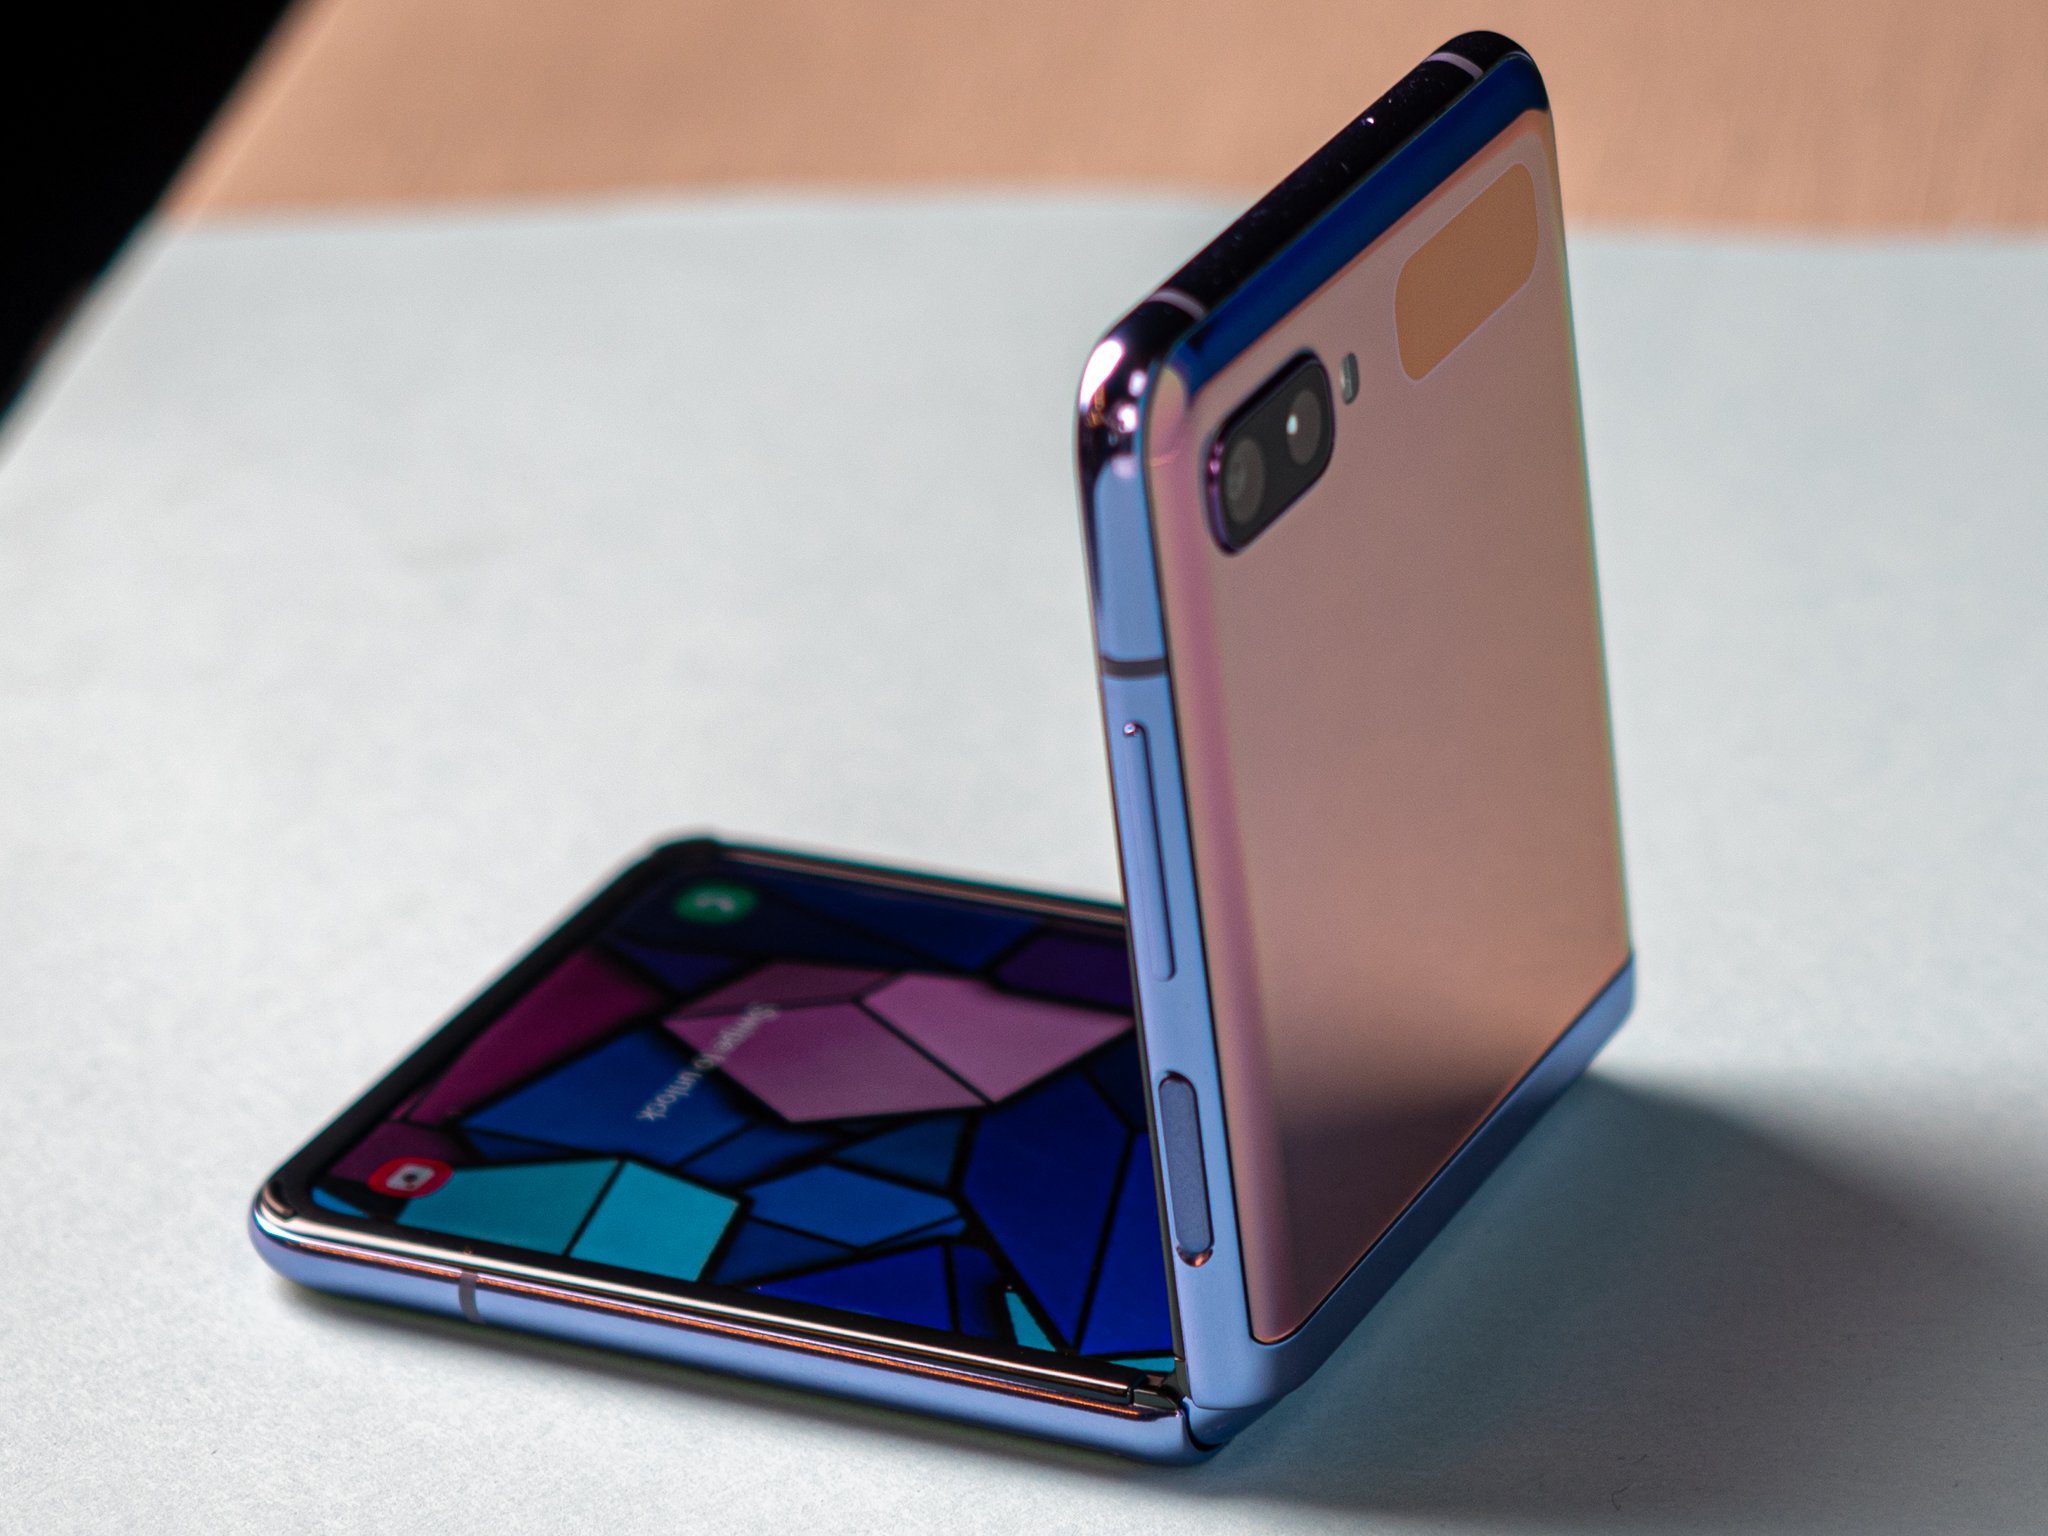 Will the Galaxy Z Flip Push the Smartphone Industry in a New Direction?